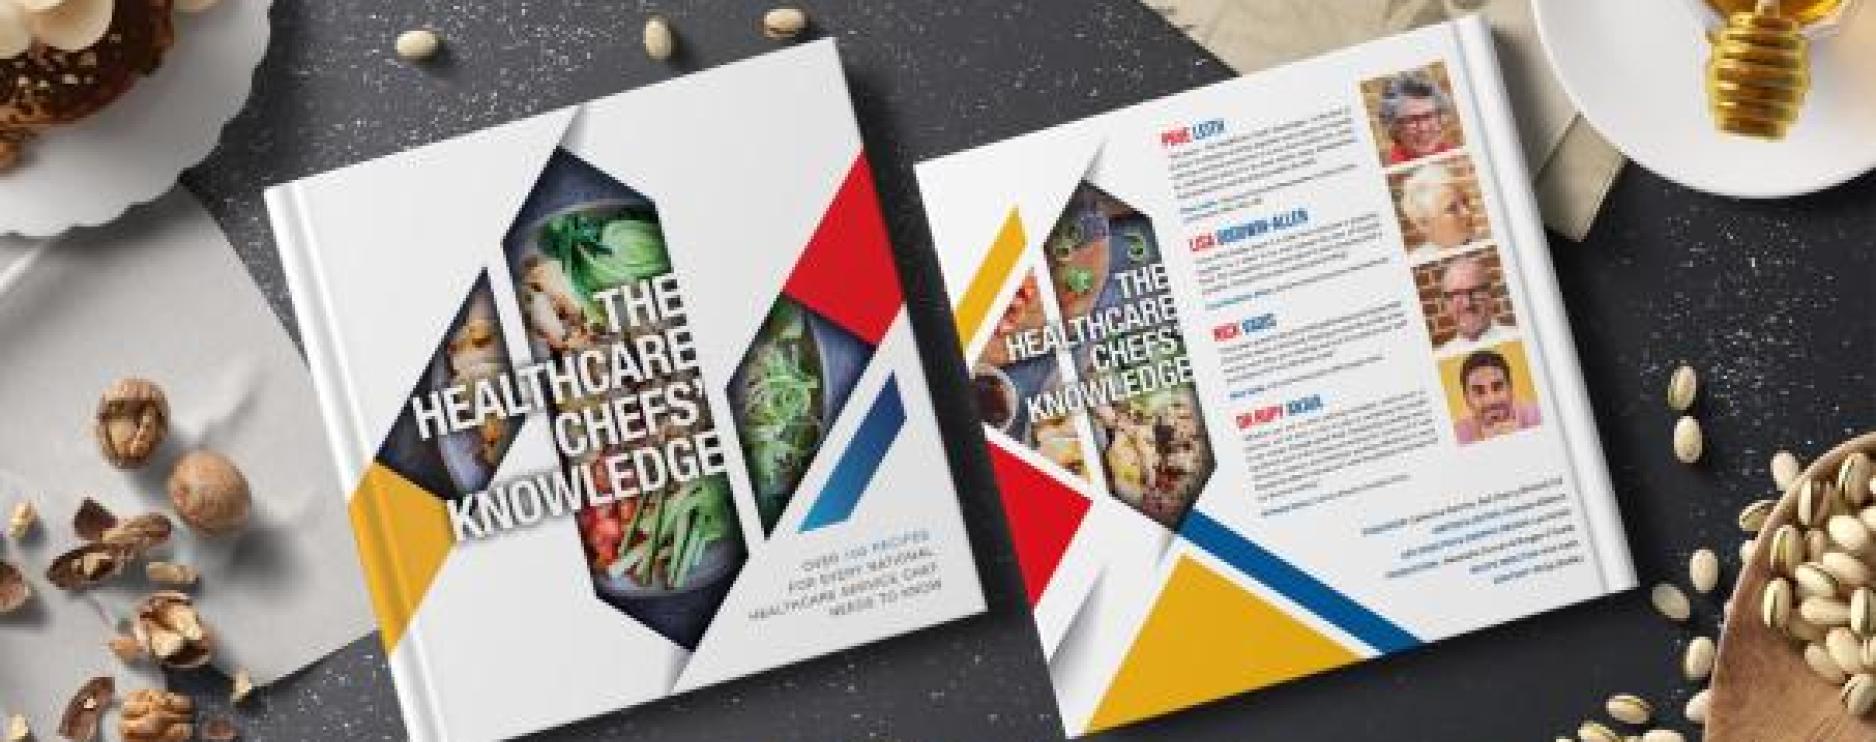 NHS England launches Healthcare Chefs’ Knowledge book 